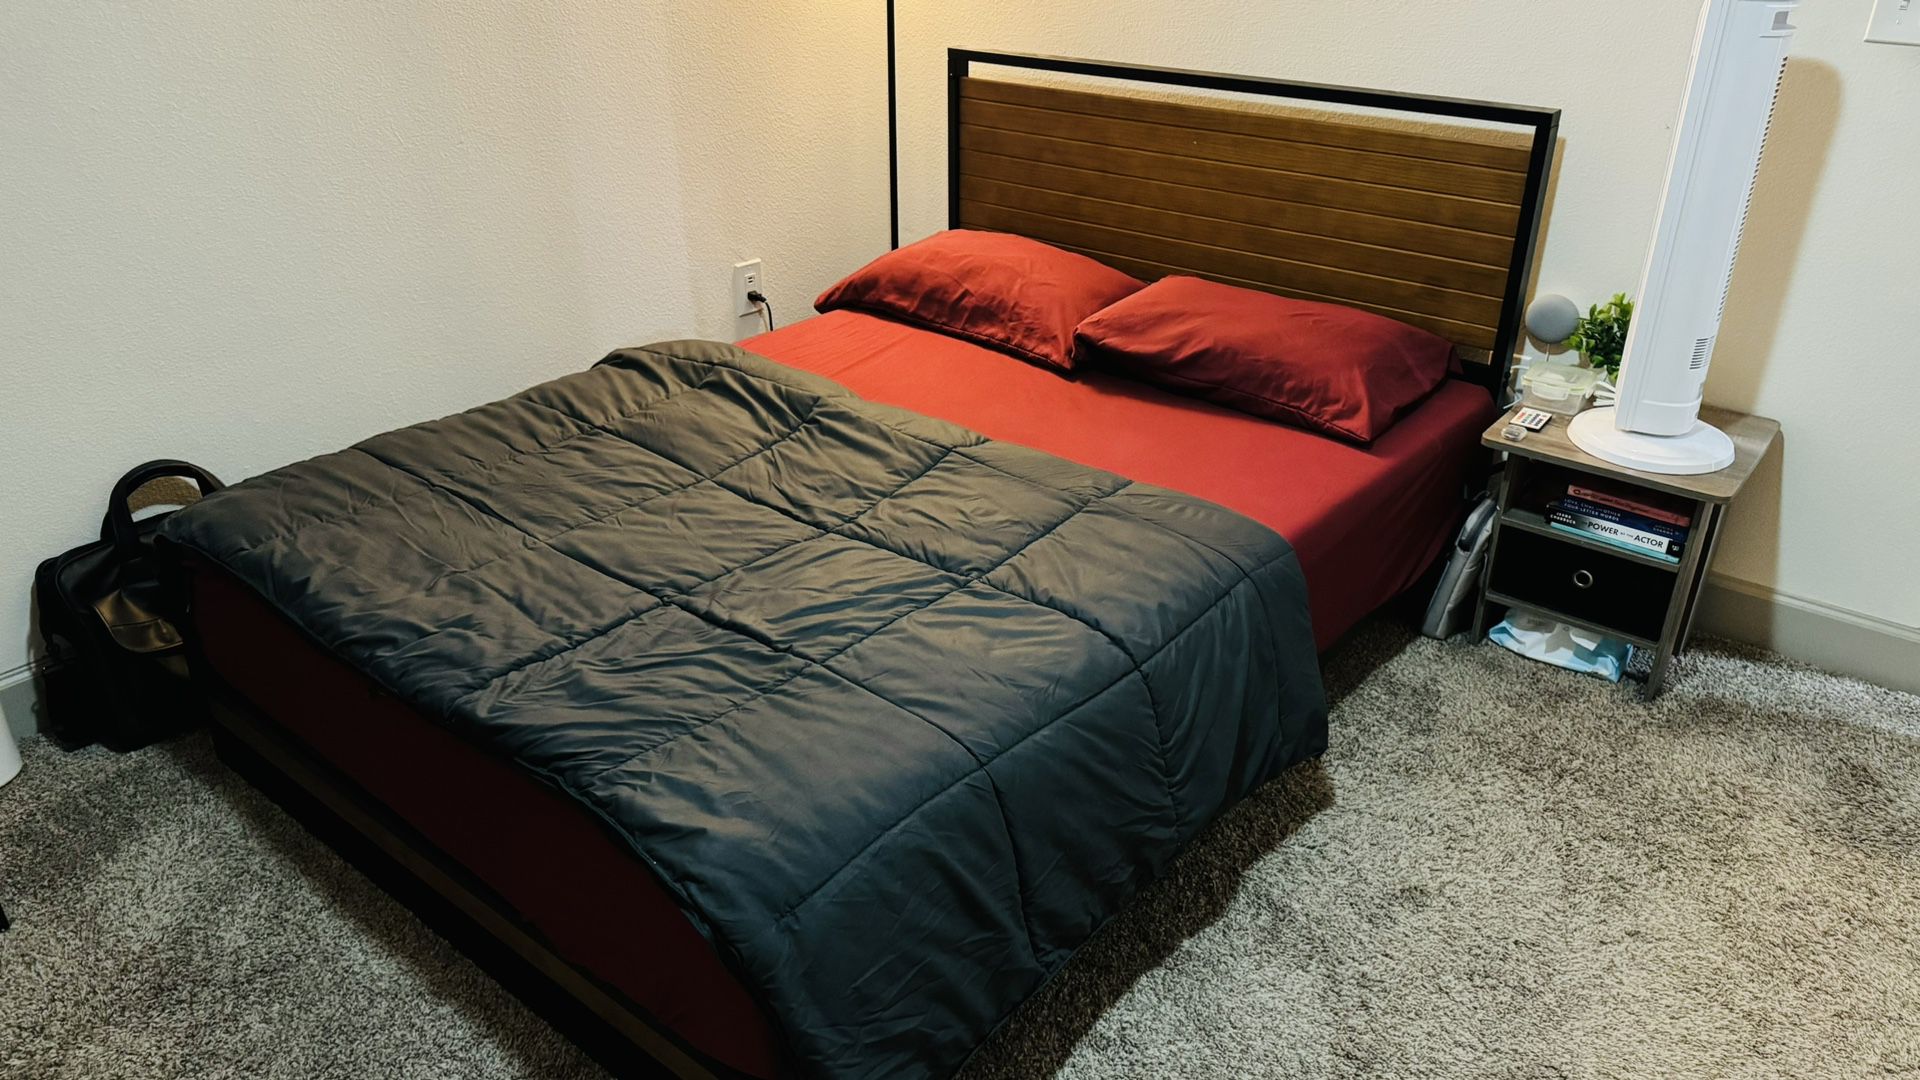 Full Mattress And bed frame